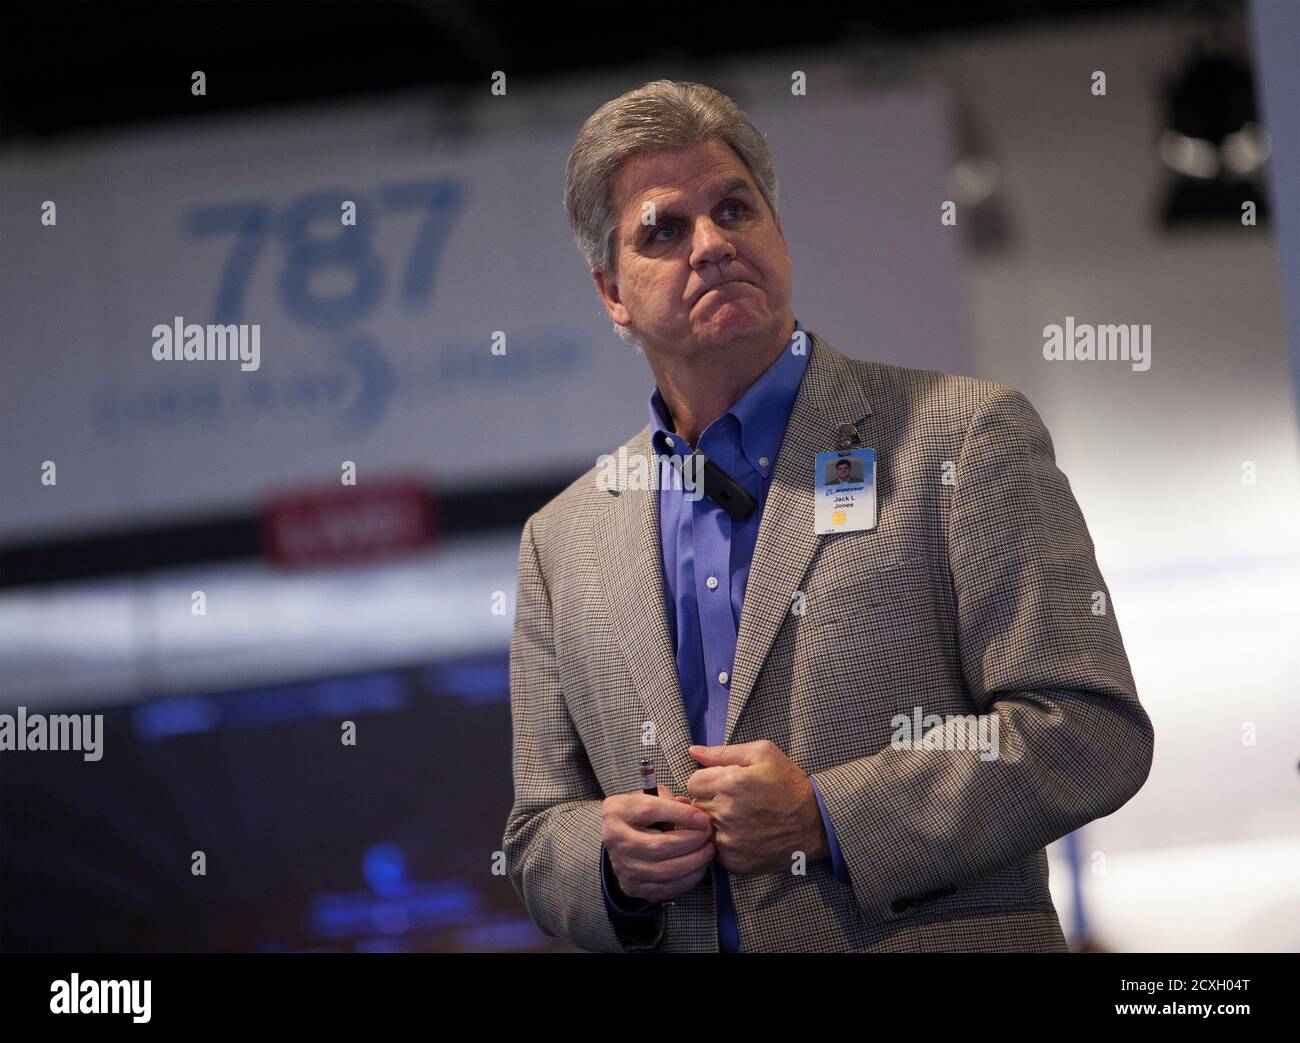 Boeing South Carolina general manager Jack Jones gives a year in review  presentation at the company's plant in North Charleston, South Carolina on  December 19, 2013. Three days after Boeing received proposals